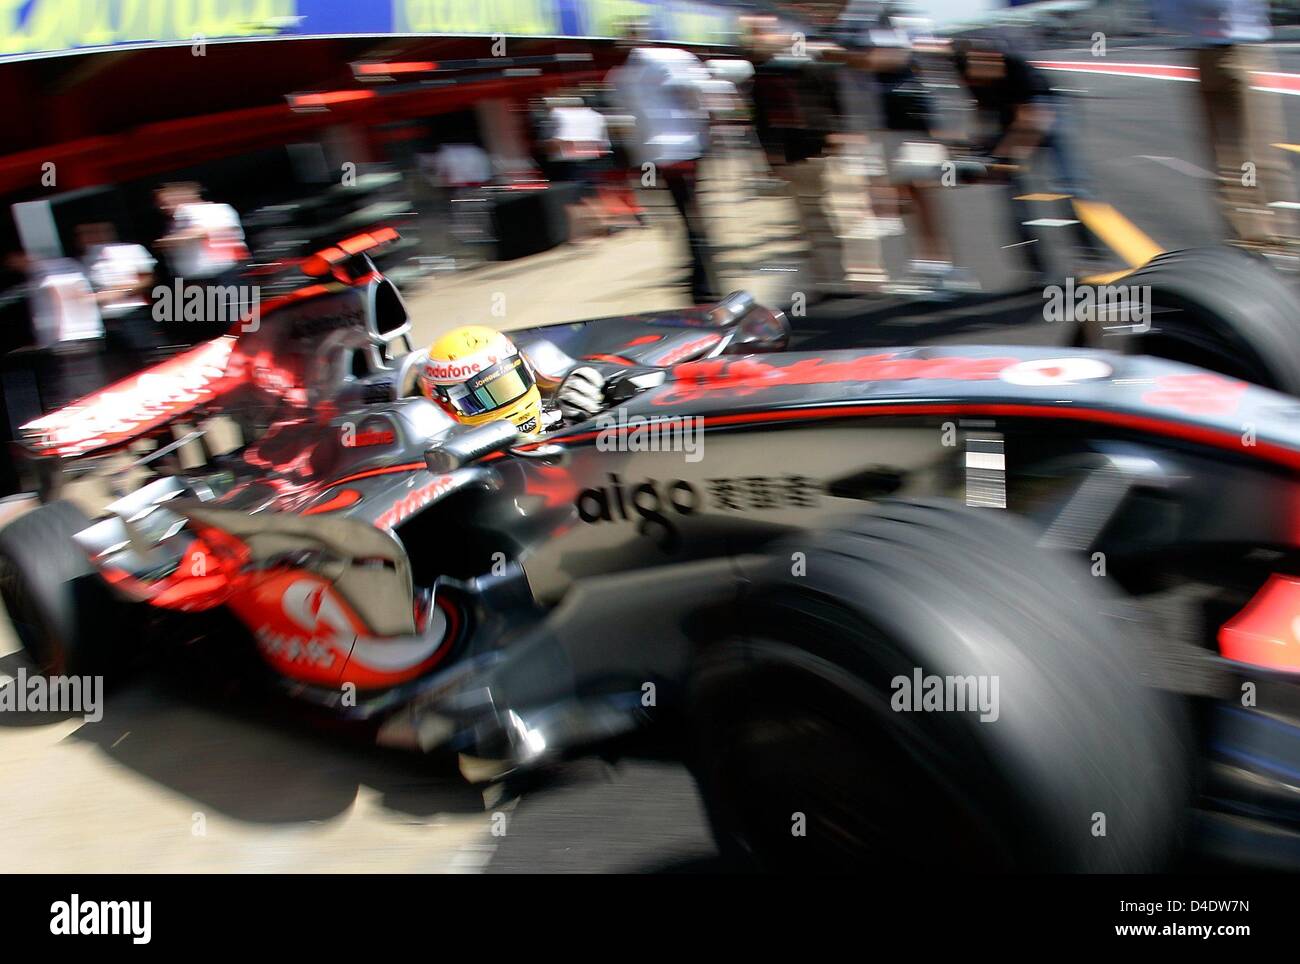 British Formula One driver Lewis Hamilton of McLaren Mercedes steers his car out the pits during the first practice session at Circuit de Catalunya in Montmelo near Barcelona, Spain, 24 April 2008. The Formula 1 Grand Prix of Spain be held here on 27 April. Photo: Felix Heyder Stock Photo